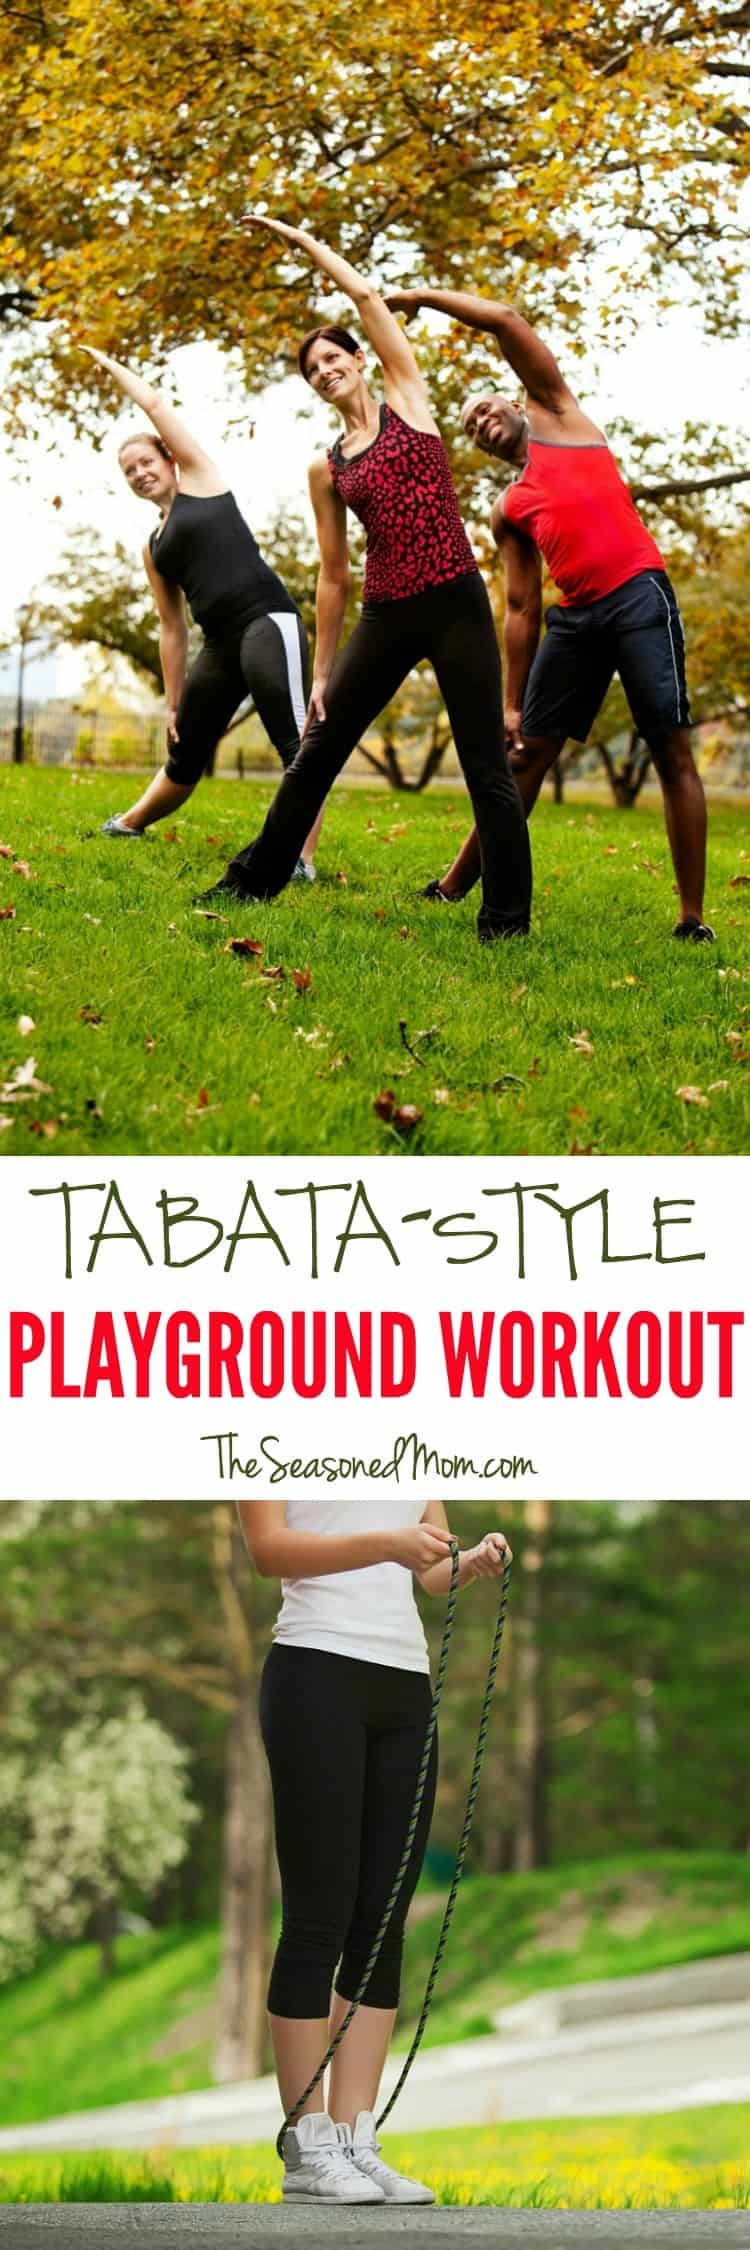 This Tabata-Style Playground Workout is an efficient 16-minute cardio and strength exercise routine that will work your entire body!